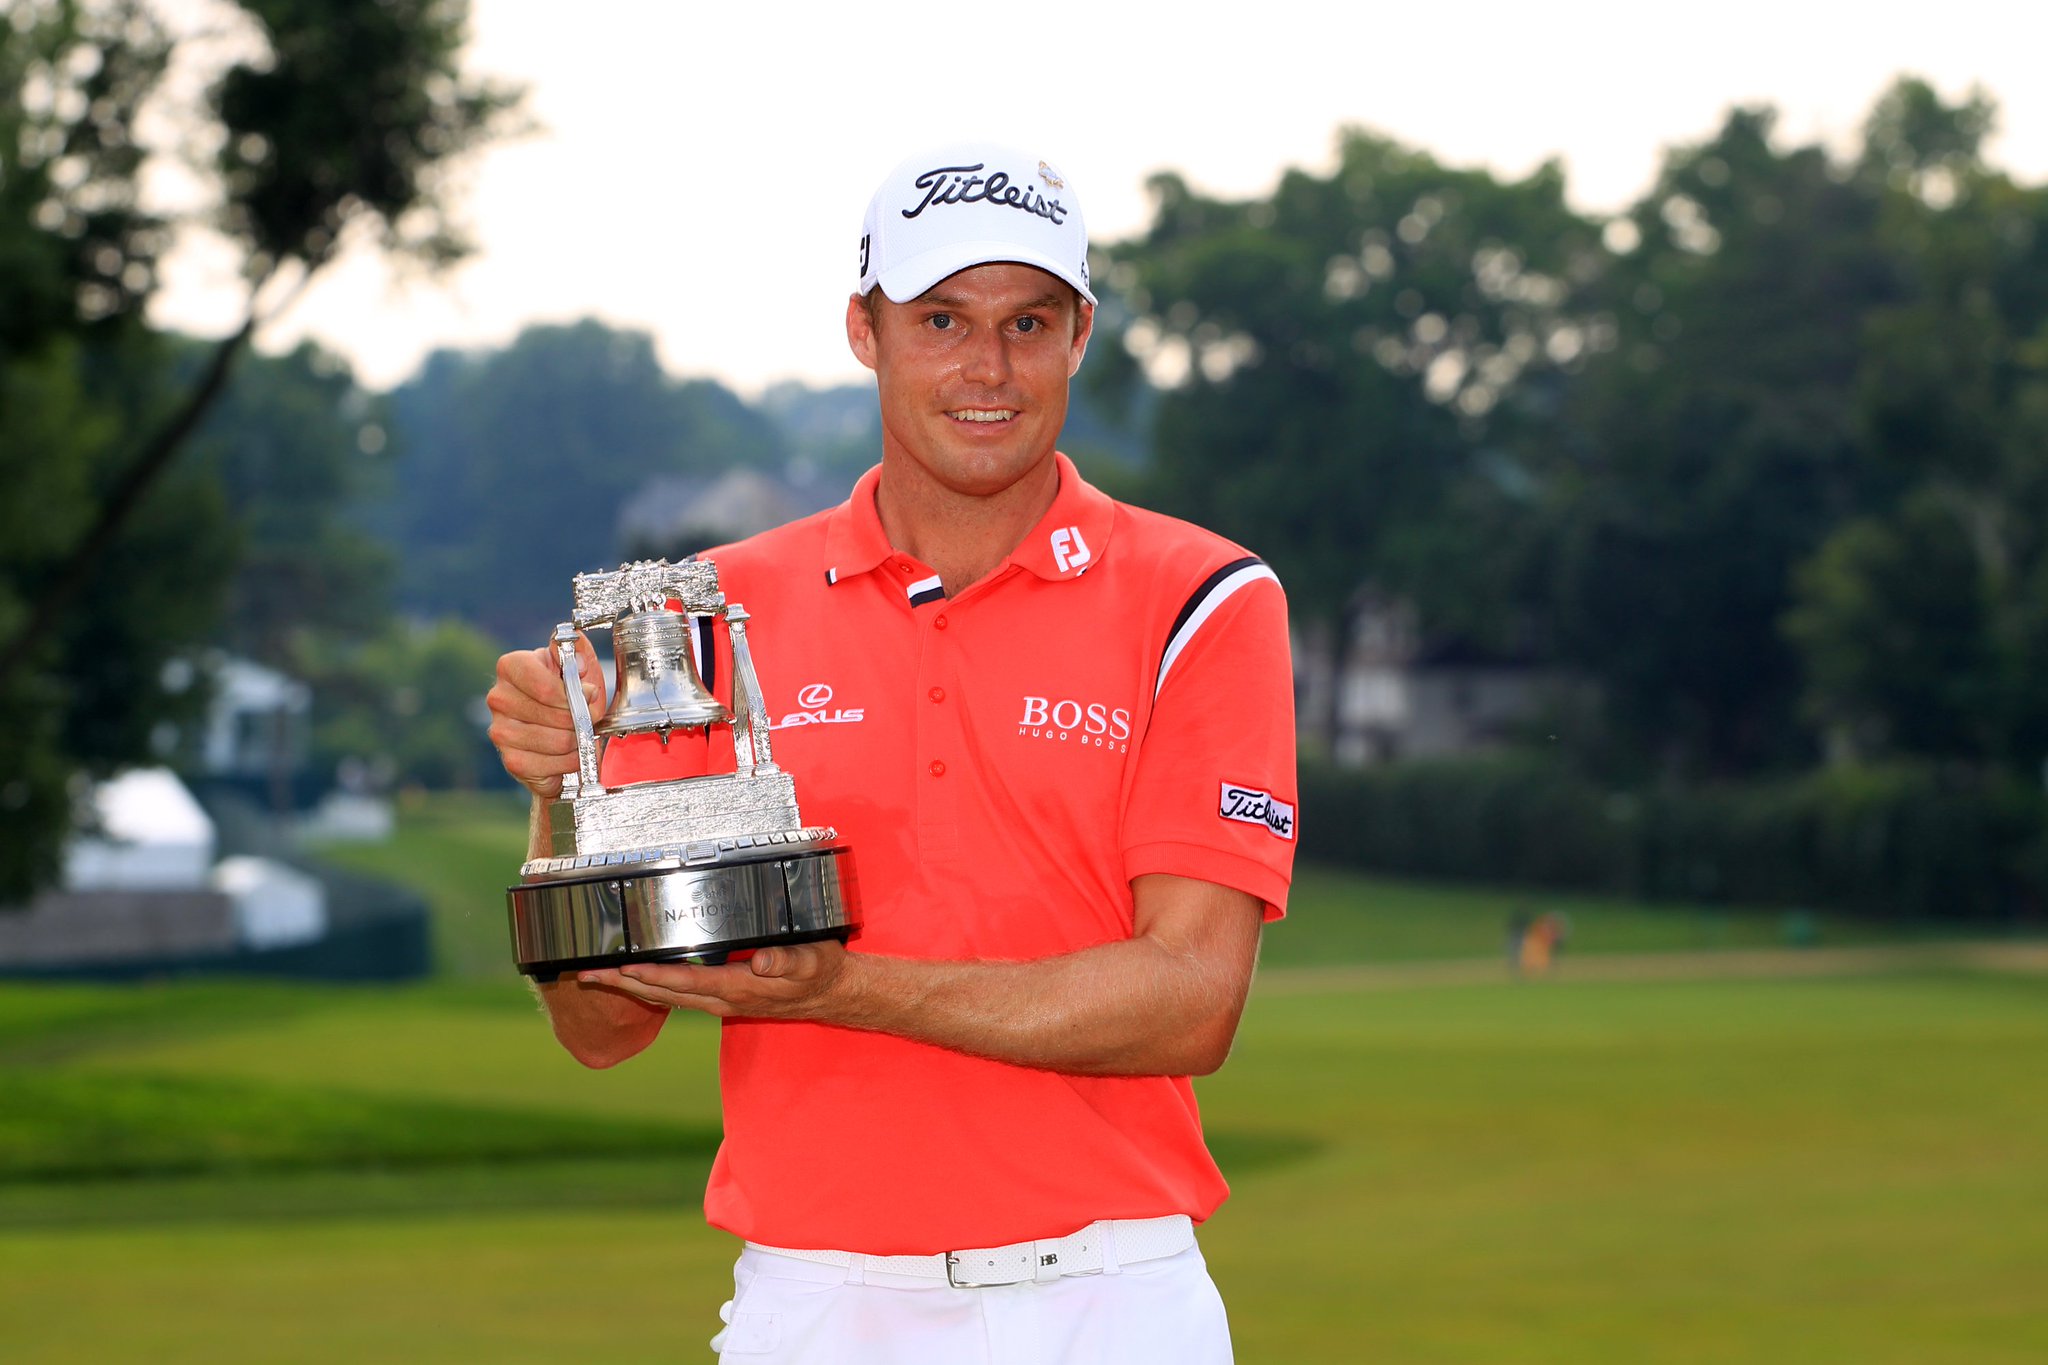 Happy birthday to our 2011 champ Nick Watney 